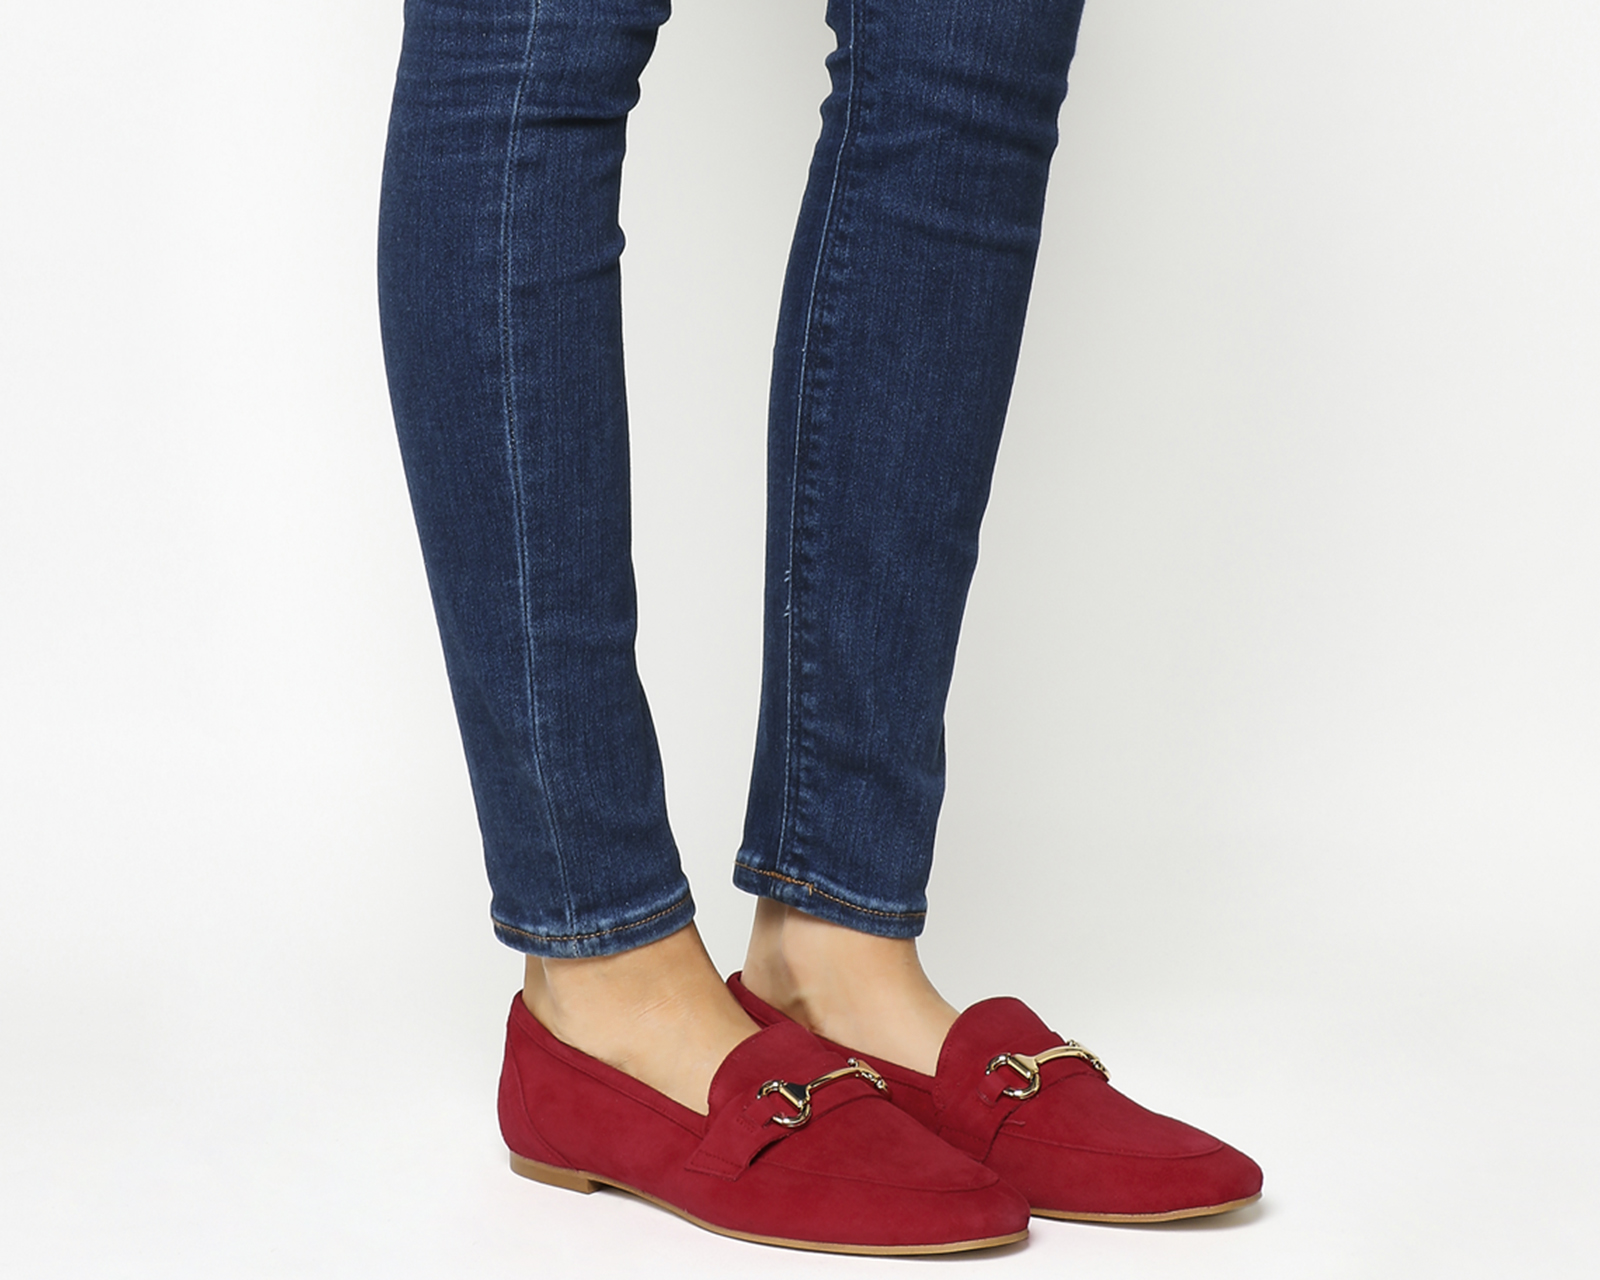 OFFICEDestiny Trim LoafersRed Suede